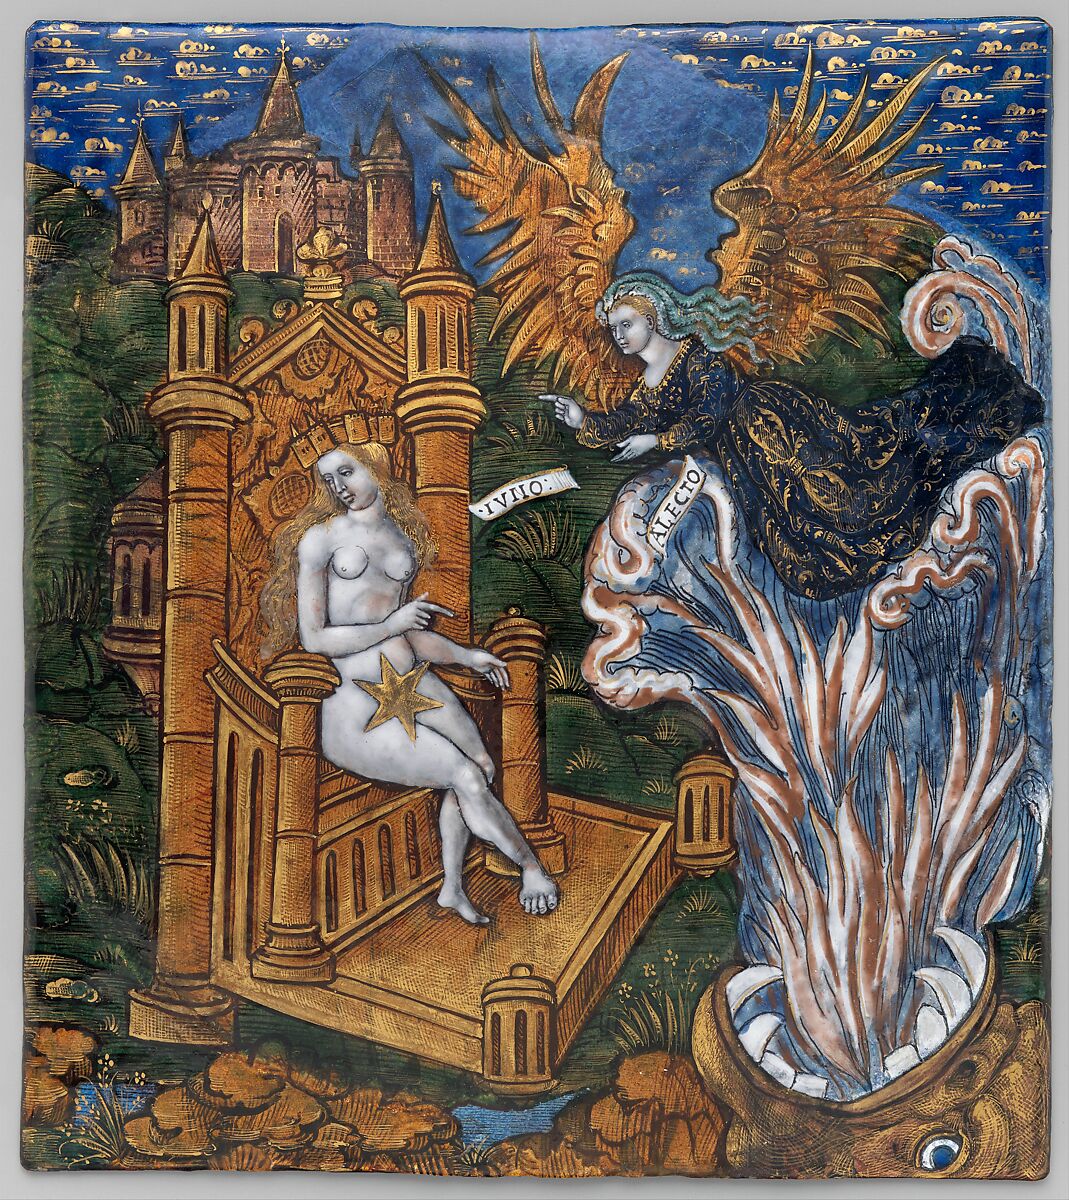 Juno, Seated on a Golden Throne, Asks Alecto to Confuse the Trojans (Aeneid, Book VI), Master of the Aeneid (active ca. 1530–40), Painted enamel on copper, partly gilt, French, Limoges 